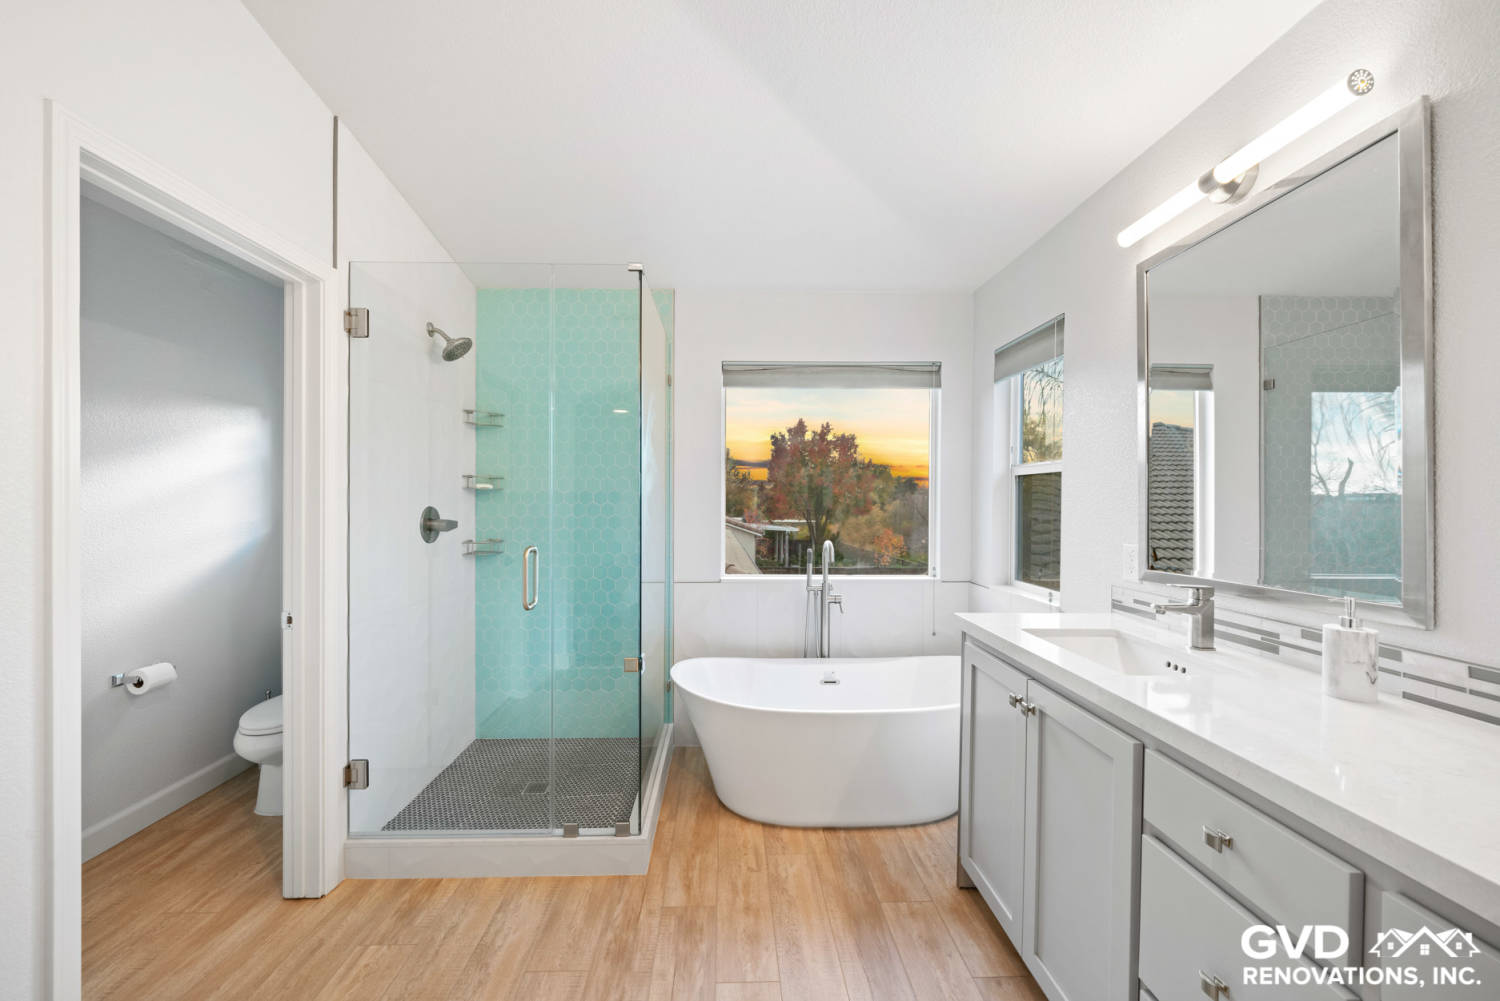 Average Cost Of A Bathroom Remodel, How Much Does It Cost To Remodel Two Bathrooms